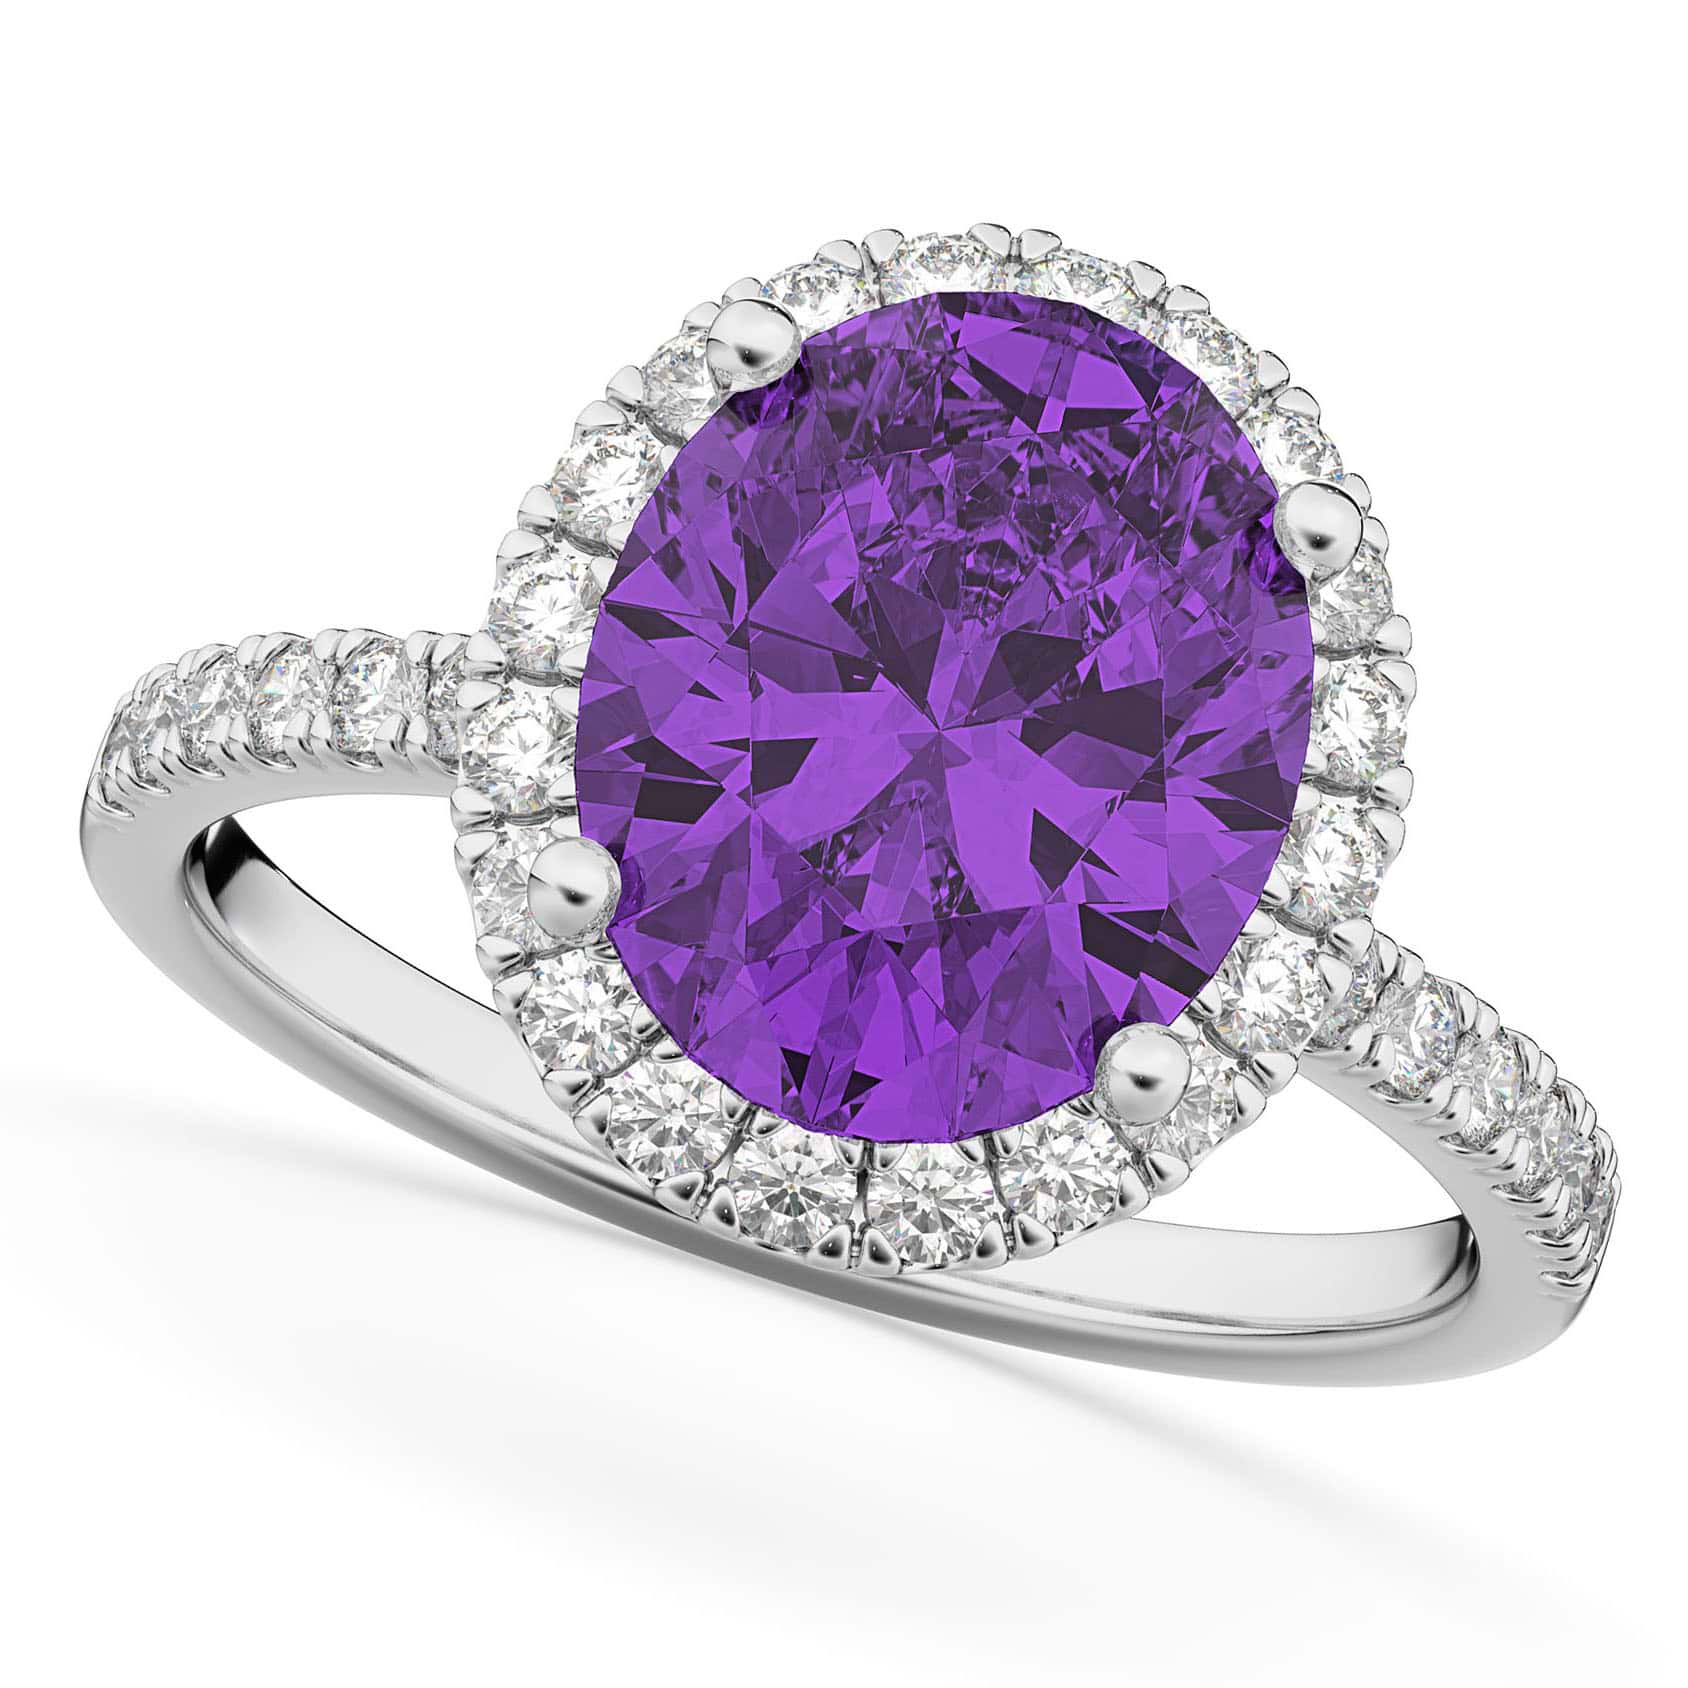 Oval Cut Halo Amethyst & Diamond Engagement Ring 14K White Gold 2.91ct